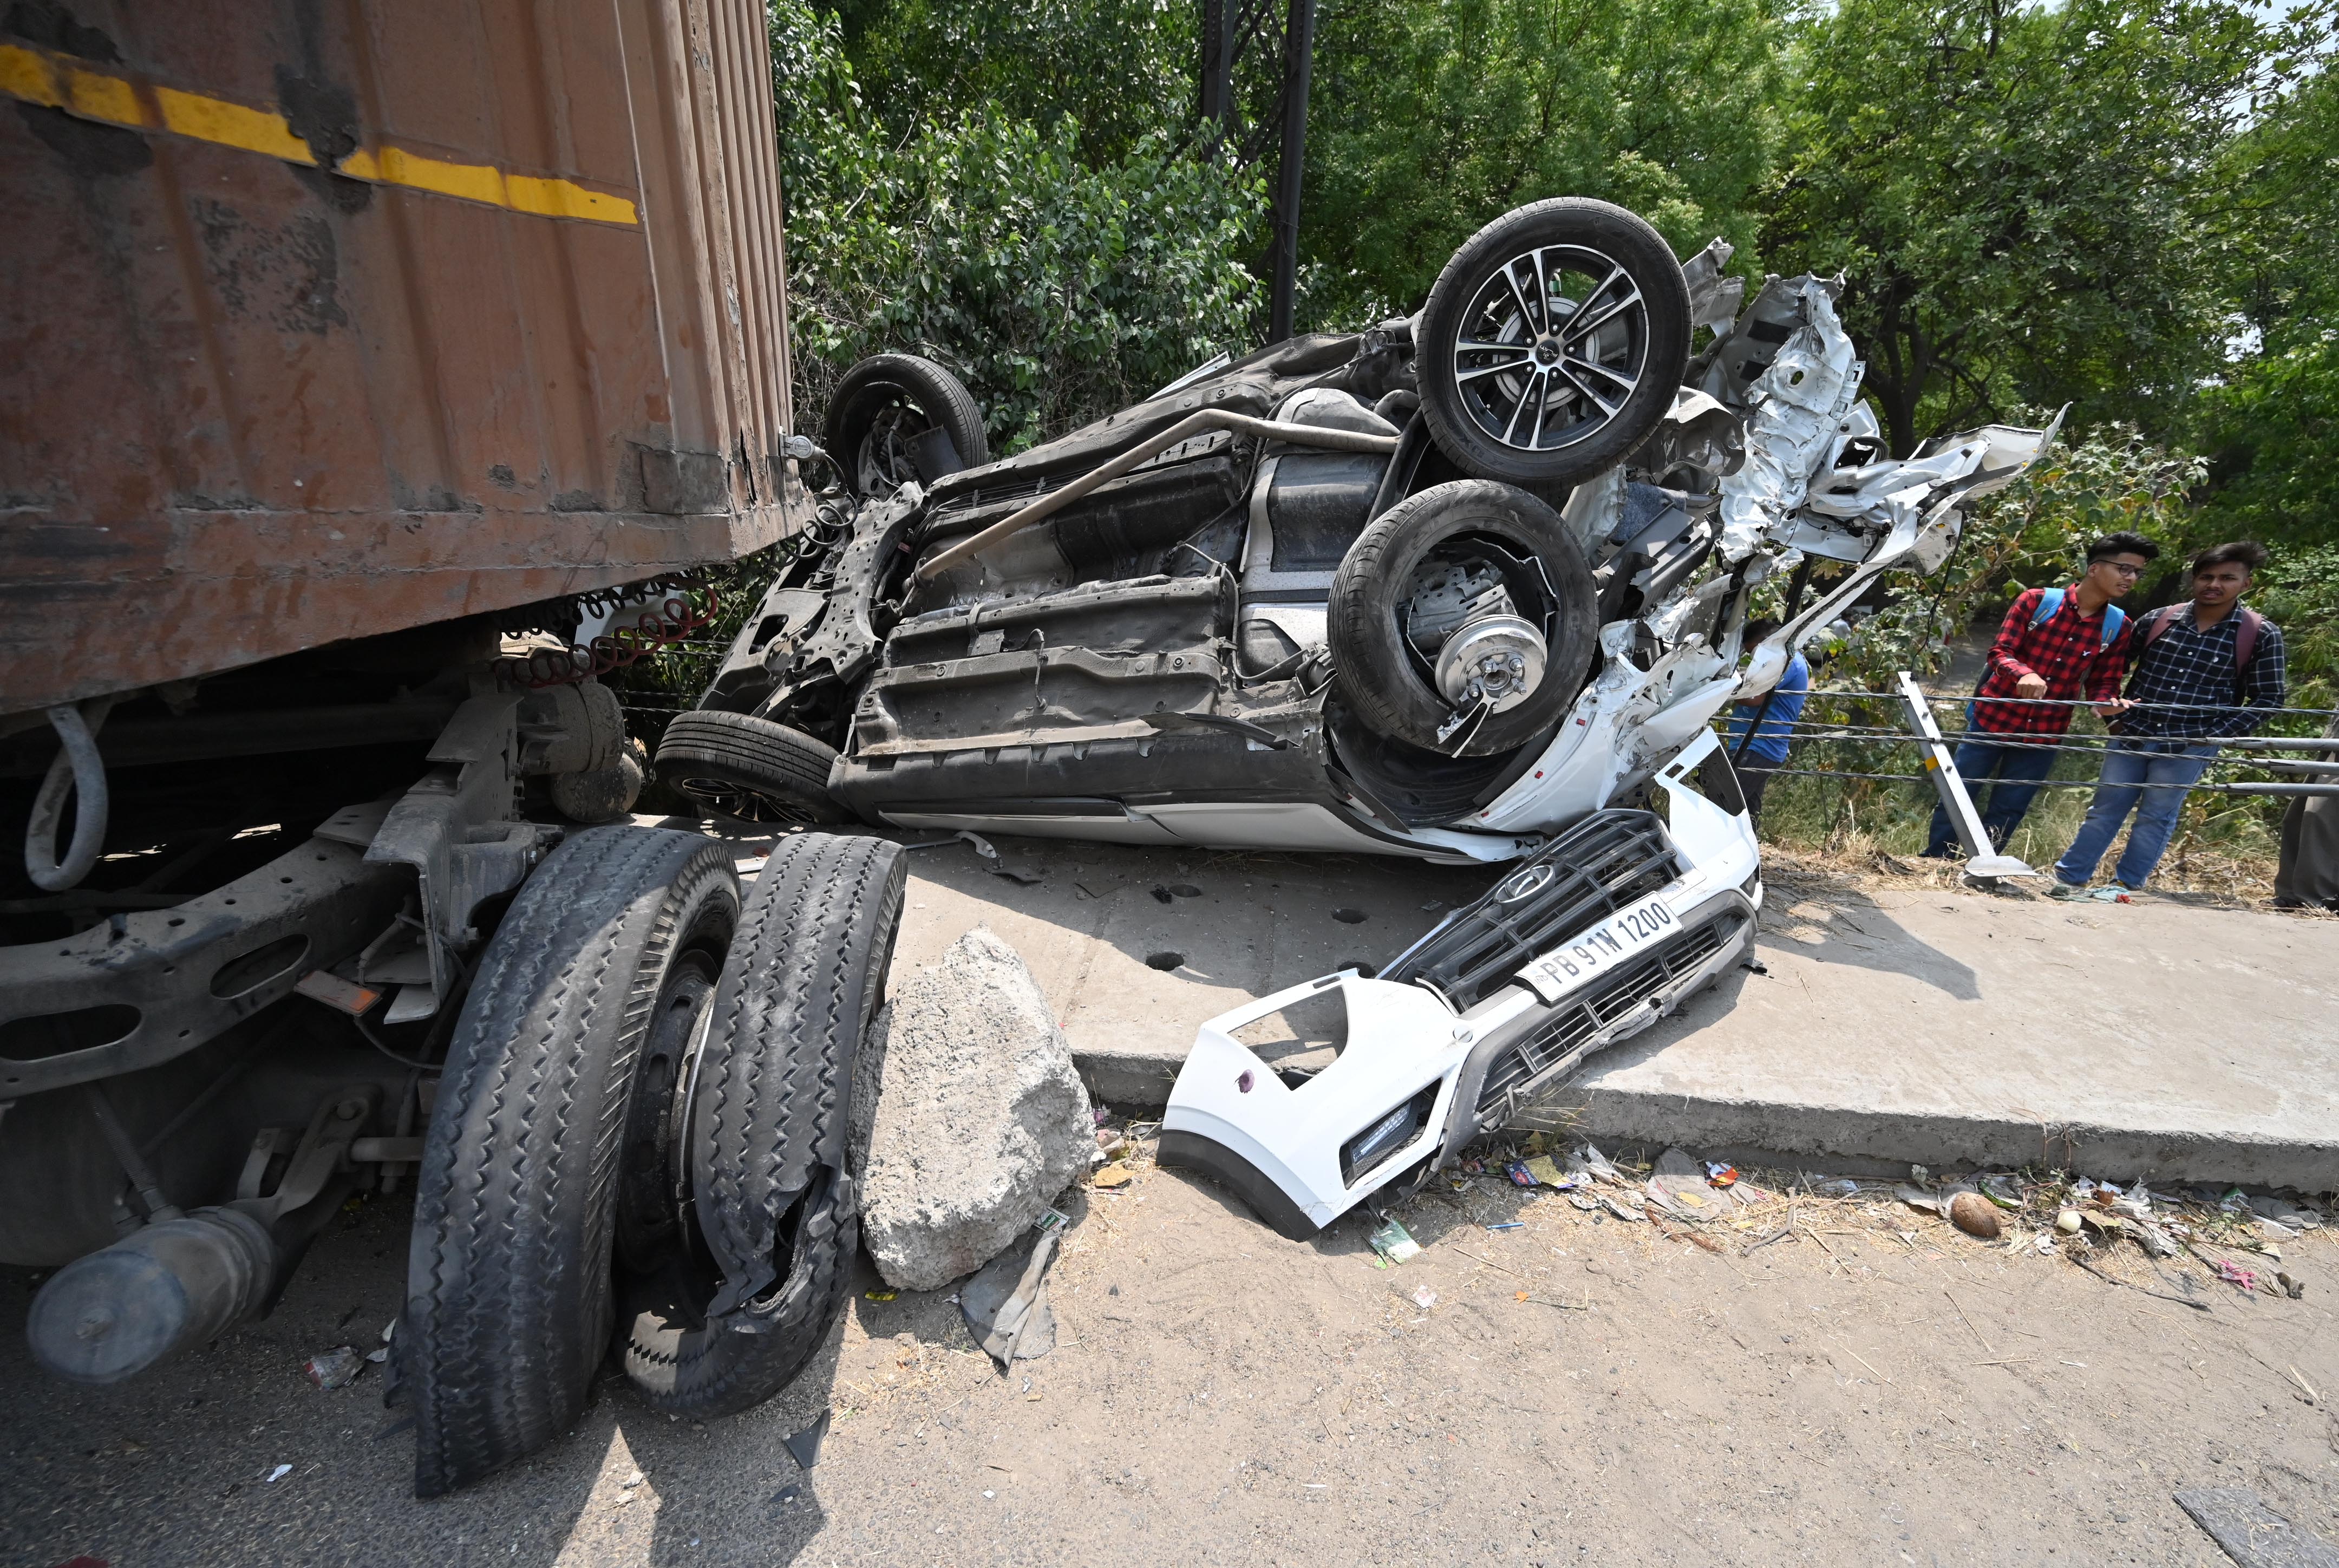 Man injured as truck rams into car on expressway in Ludhiana